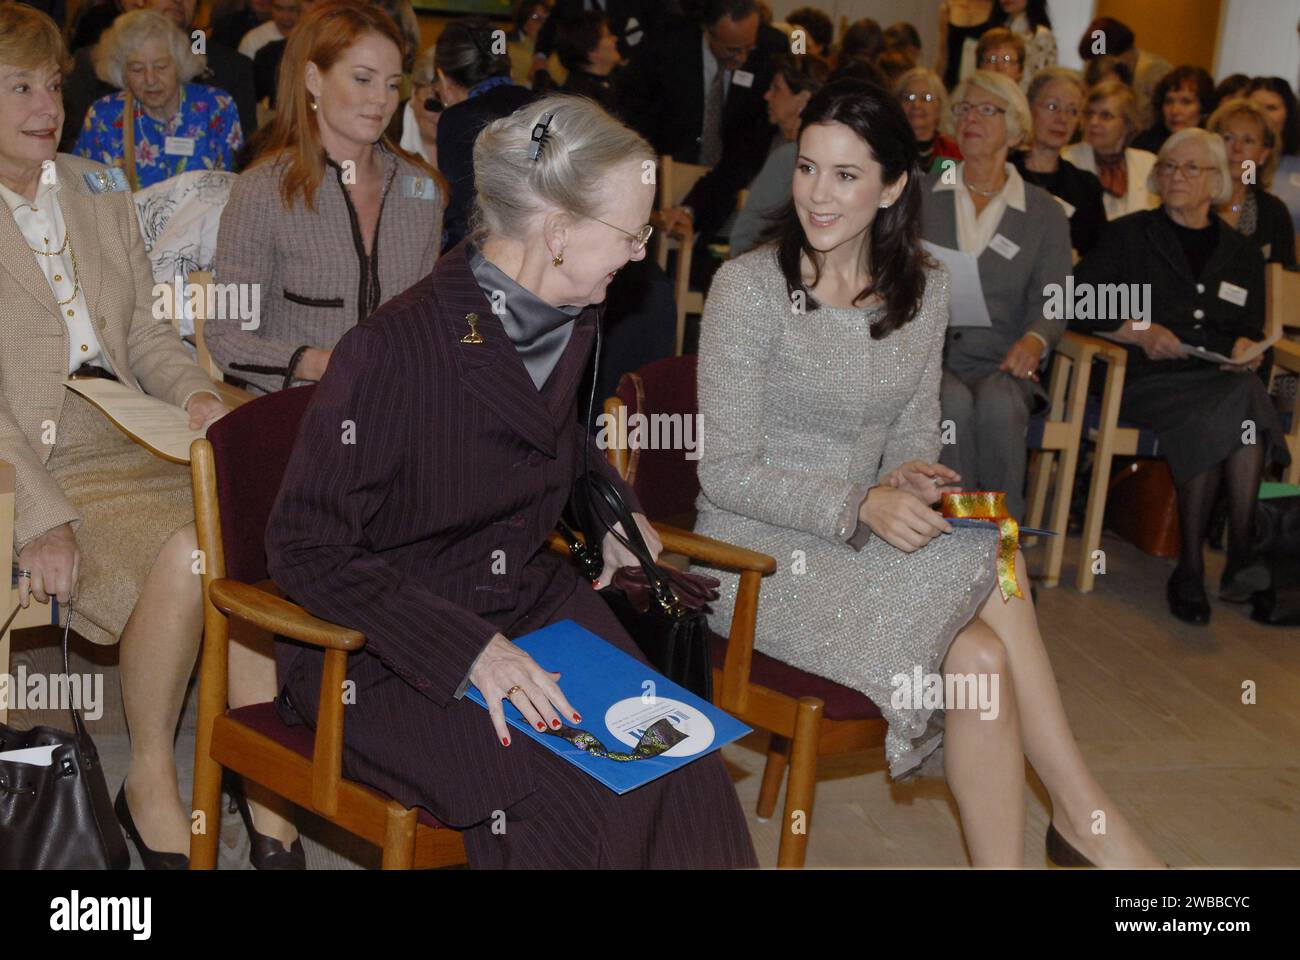 H.M.The Queen Margrethe & Crown princess Mary Donaldson together attended ICOM Costume meeting A glimpse of Danish Costume History at Vortov grundvig insitute in Copenhagen Denmark Oct.9,2006      (Photo by Francis Dean/Dean Pictures) Stock Photo